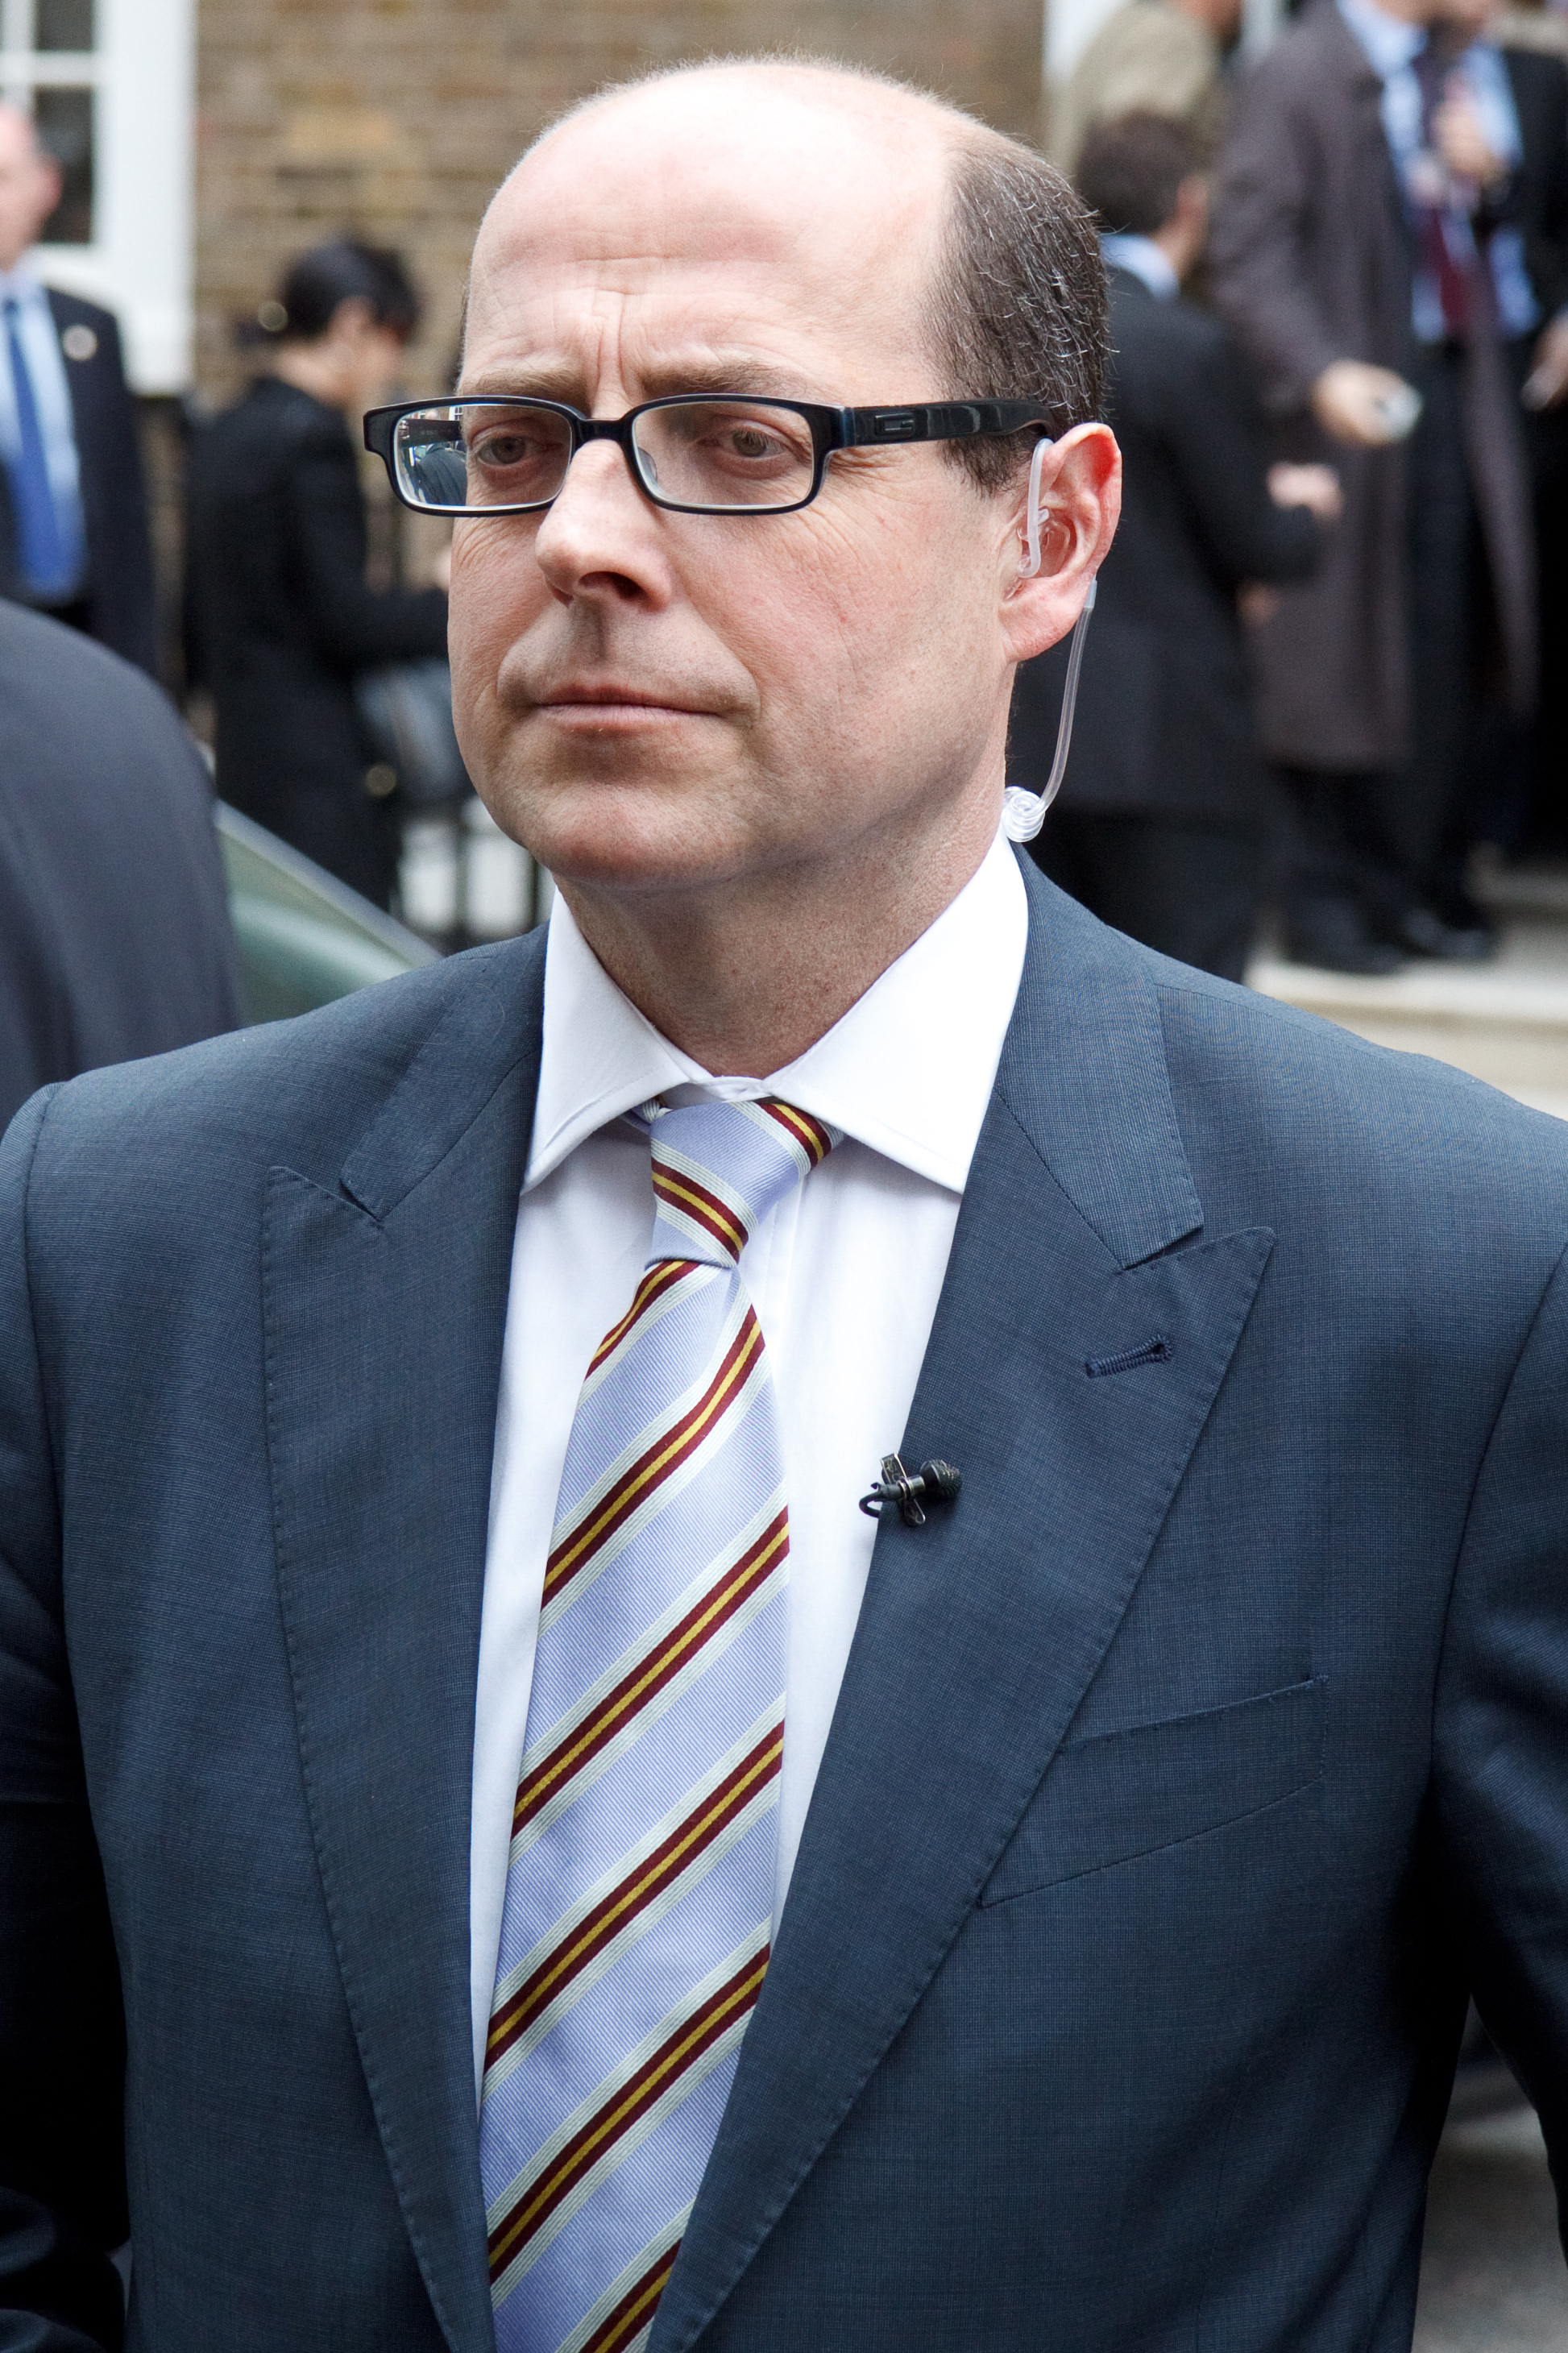 Nick Robinson, English journalist and blogger was born on October 5, 1963.